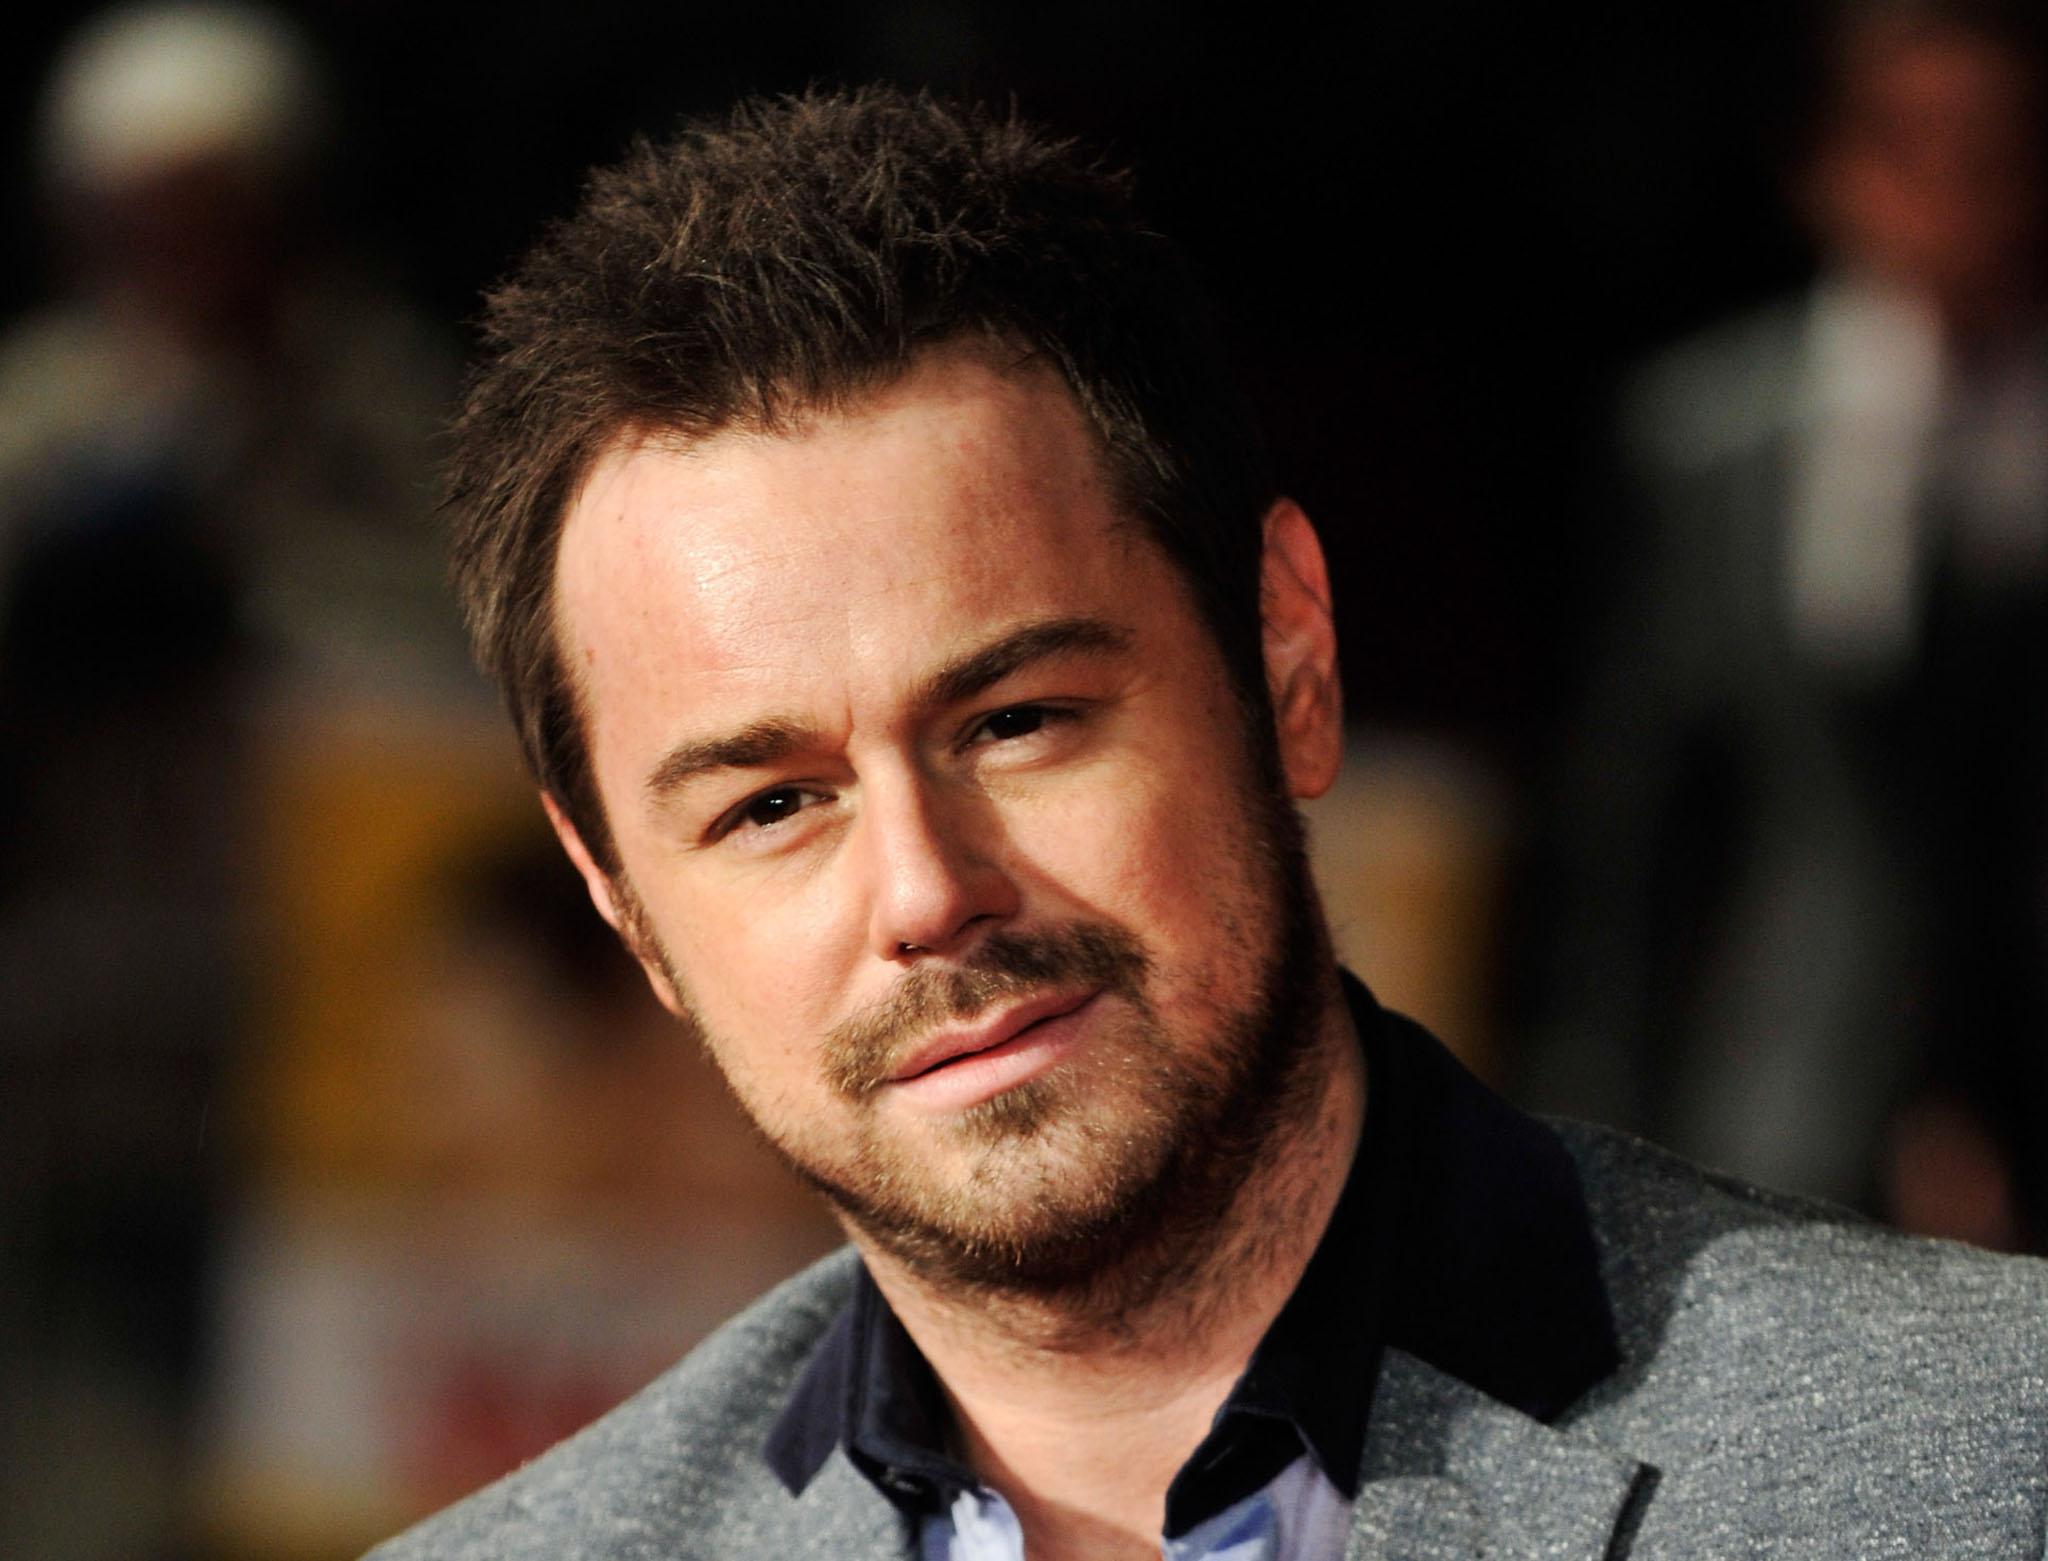 Danny Dyer ‘proud’ he’s helps young gay men come out